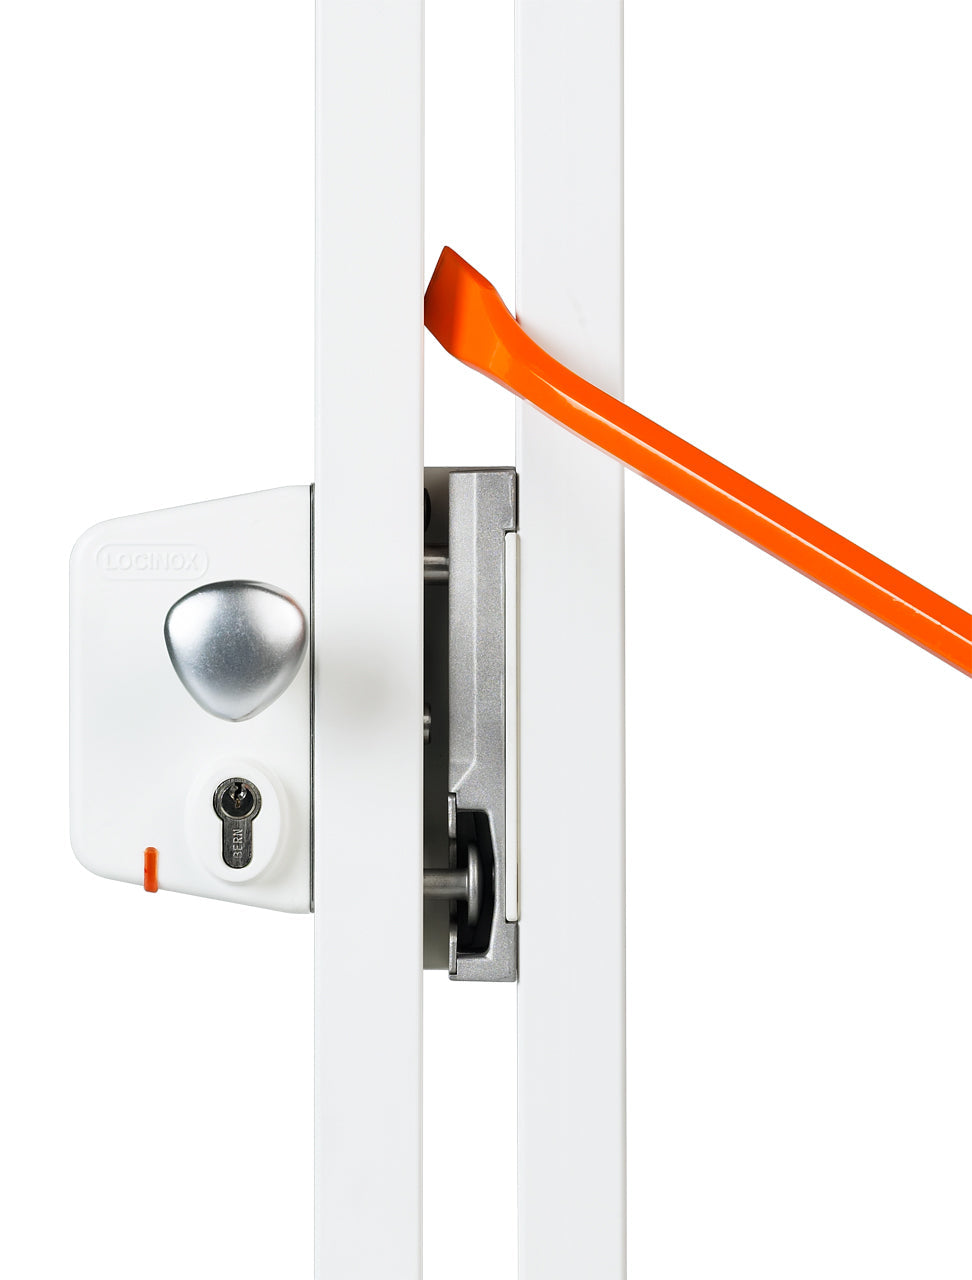 Surface Mounted Electric Gate Lock with Fail Open Functionality - For Square Profiles 1-1/4" Inch to 2-1/2" Inch - Multiple Finishes - Sold Individually